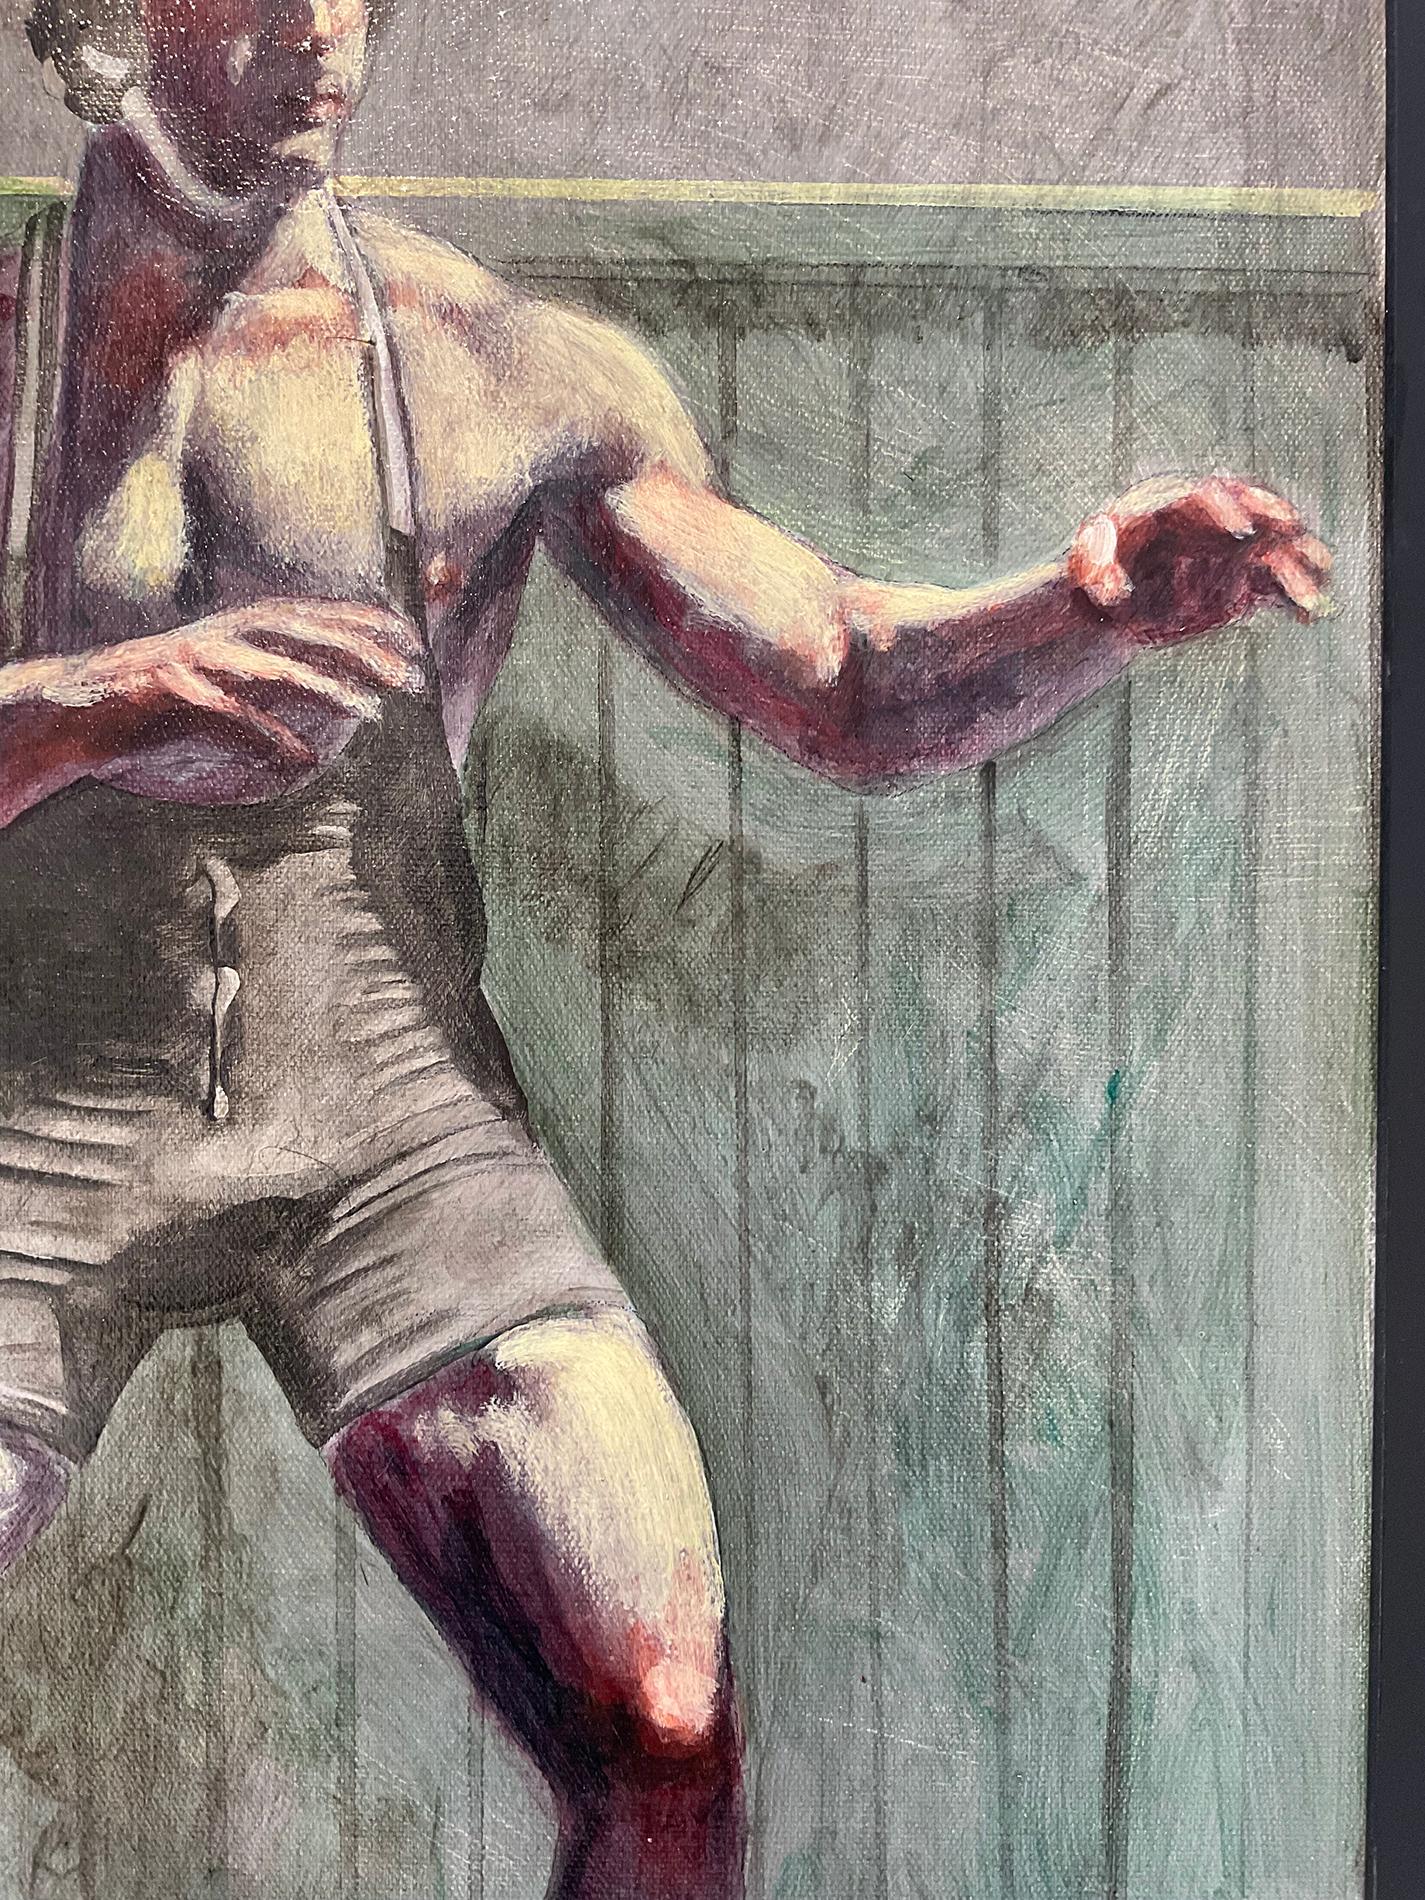 Wrestler (Figurative Painting of Athlete by Mark Beard, Bruce Sargeant) 2